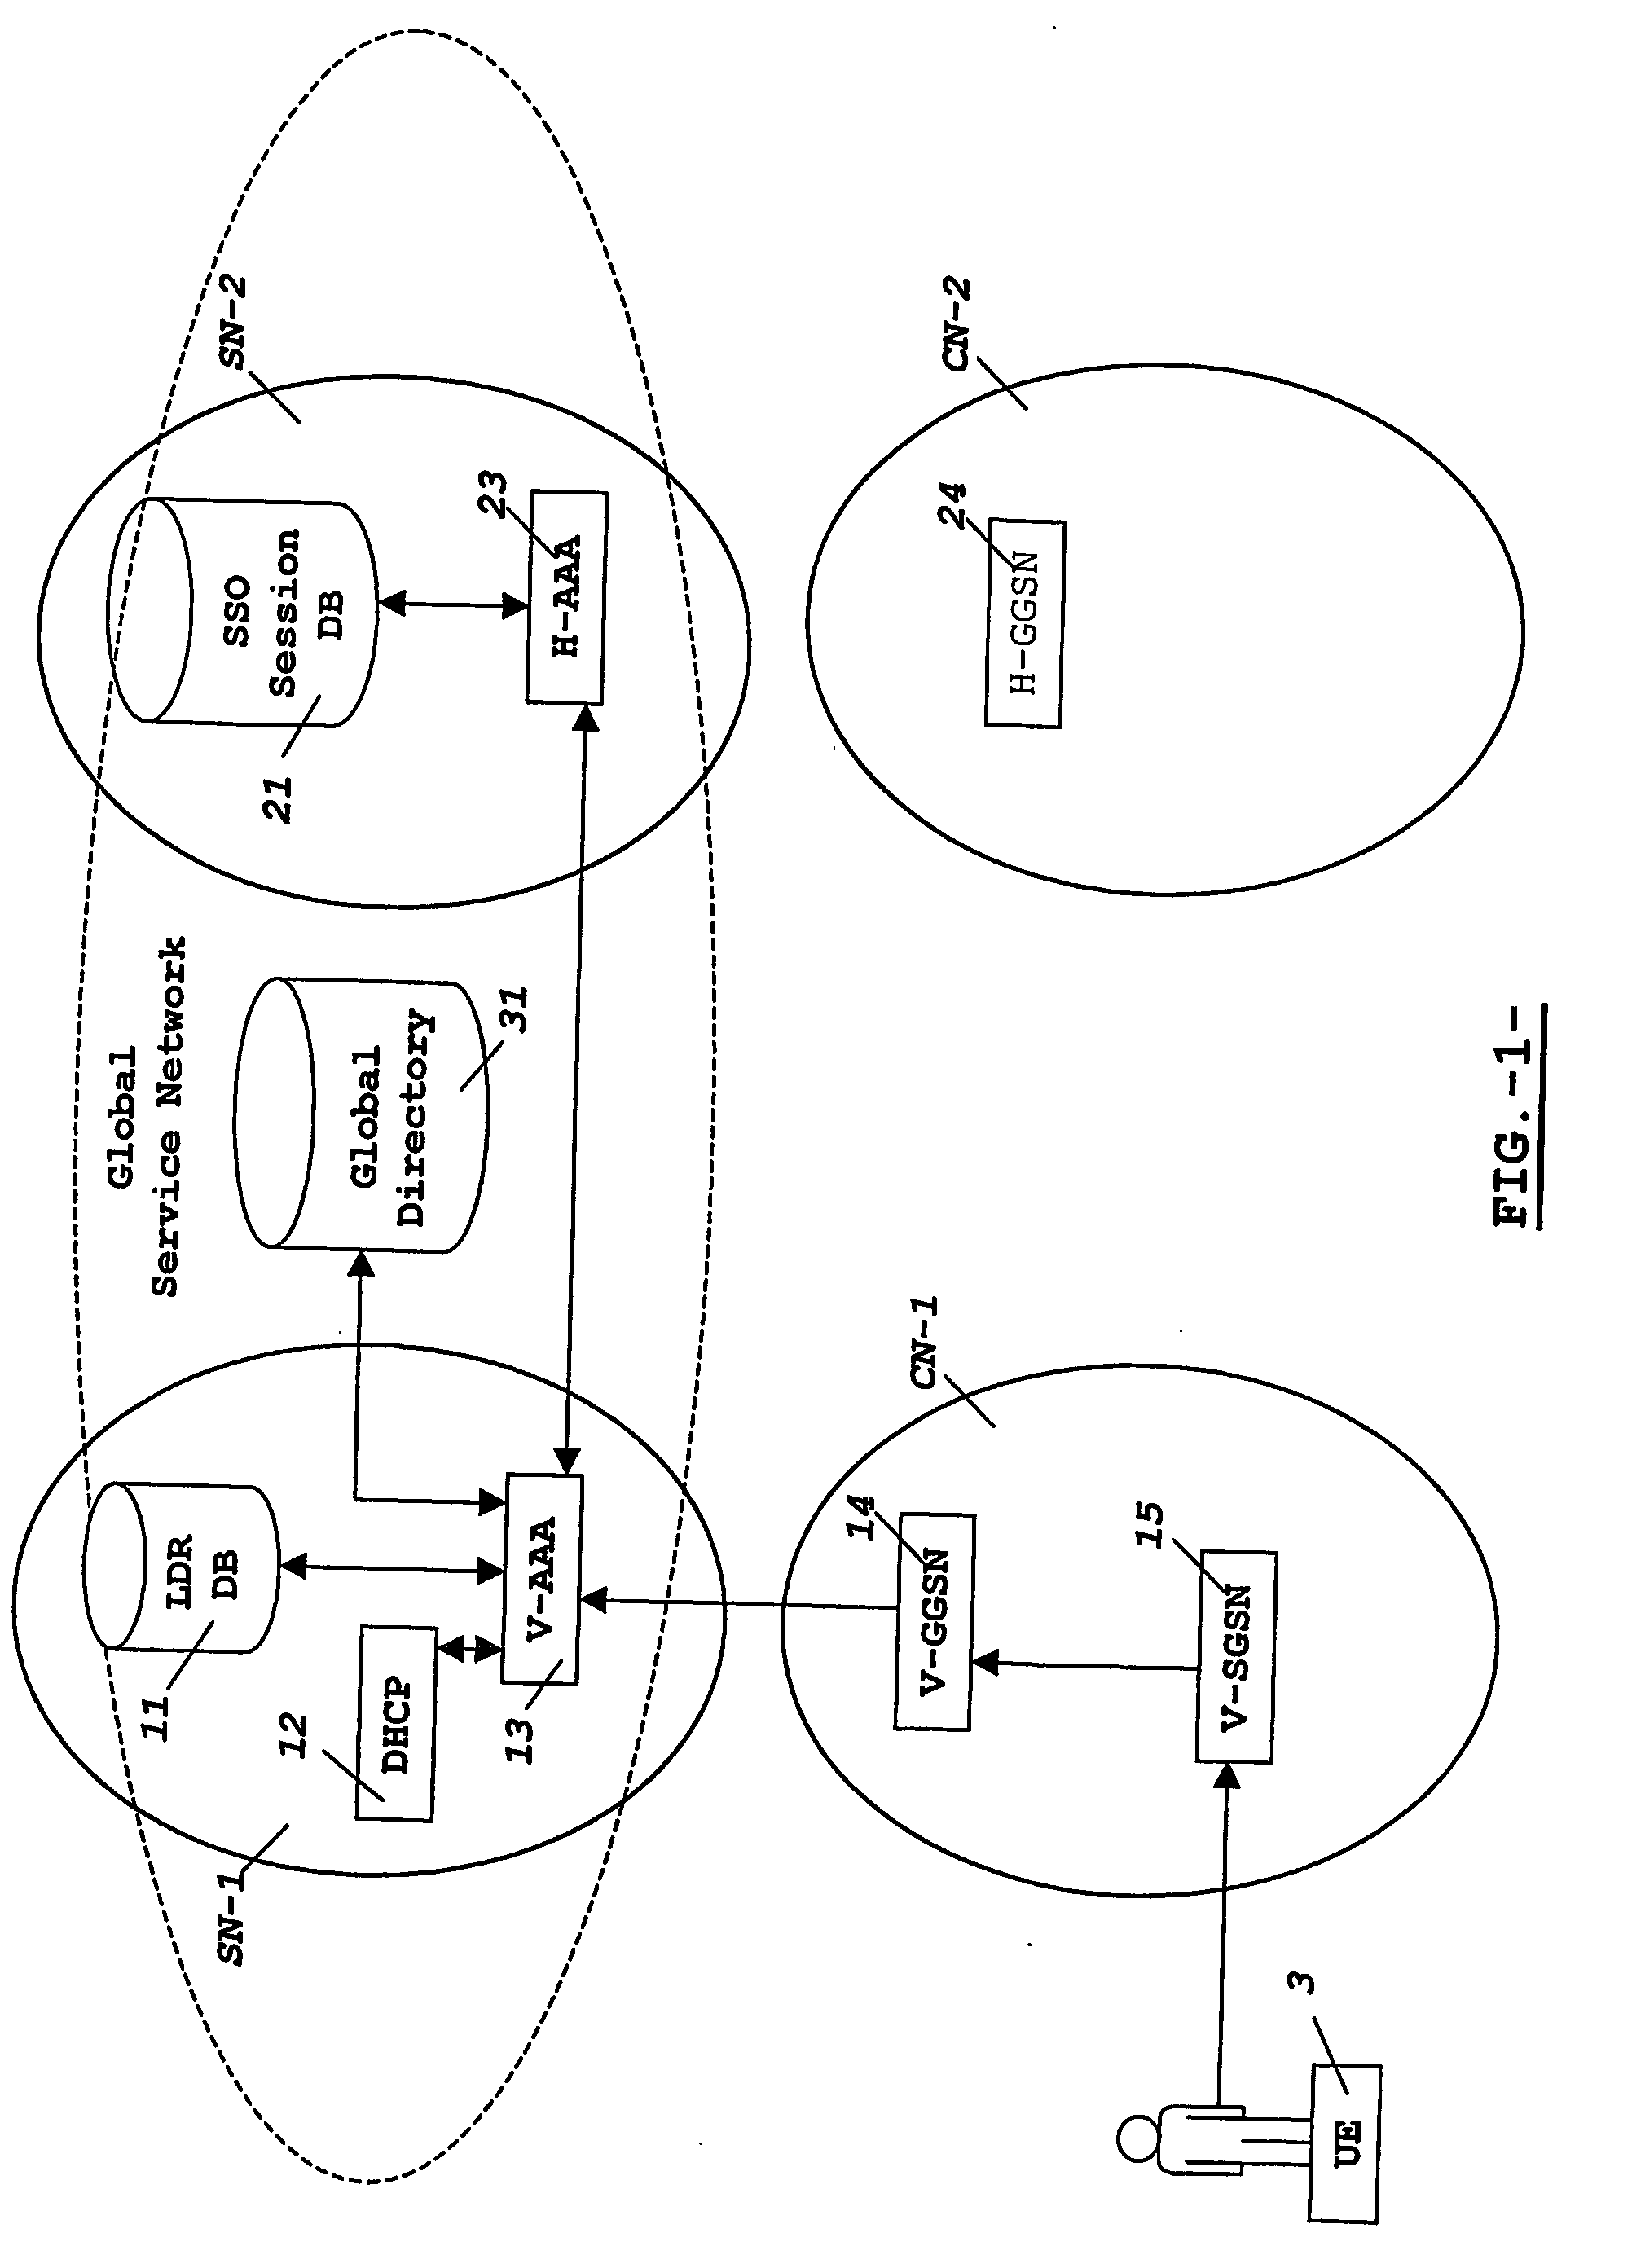 Single sign-on for users of a packet radio network roaming in a multinational operator network